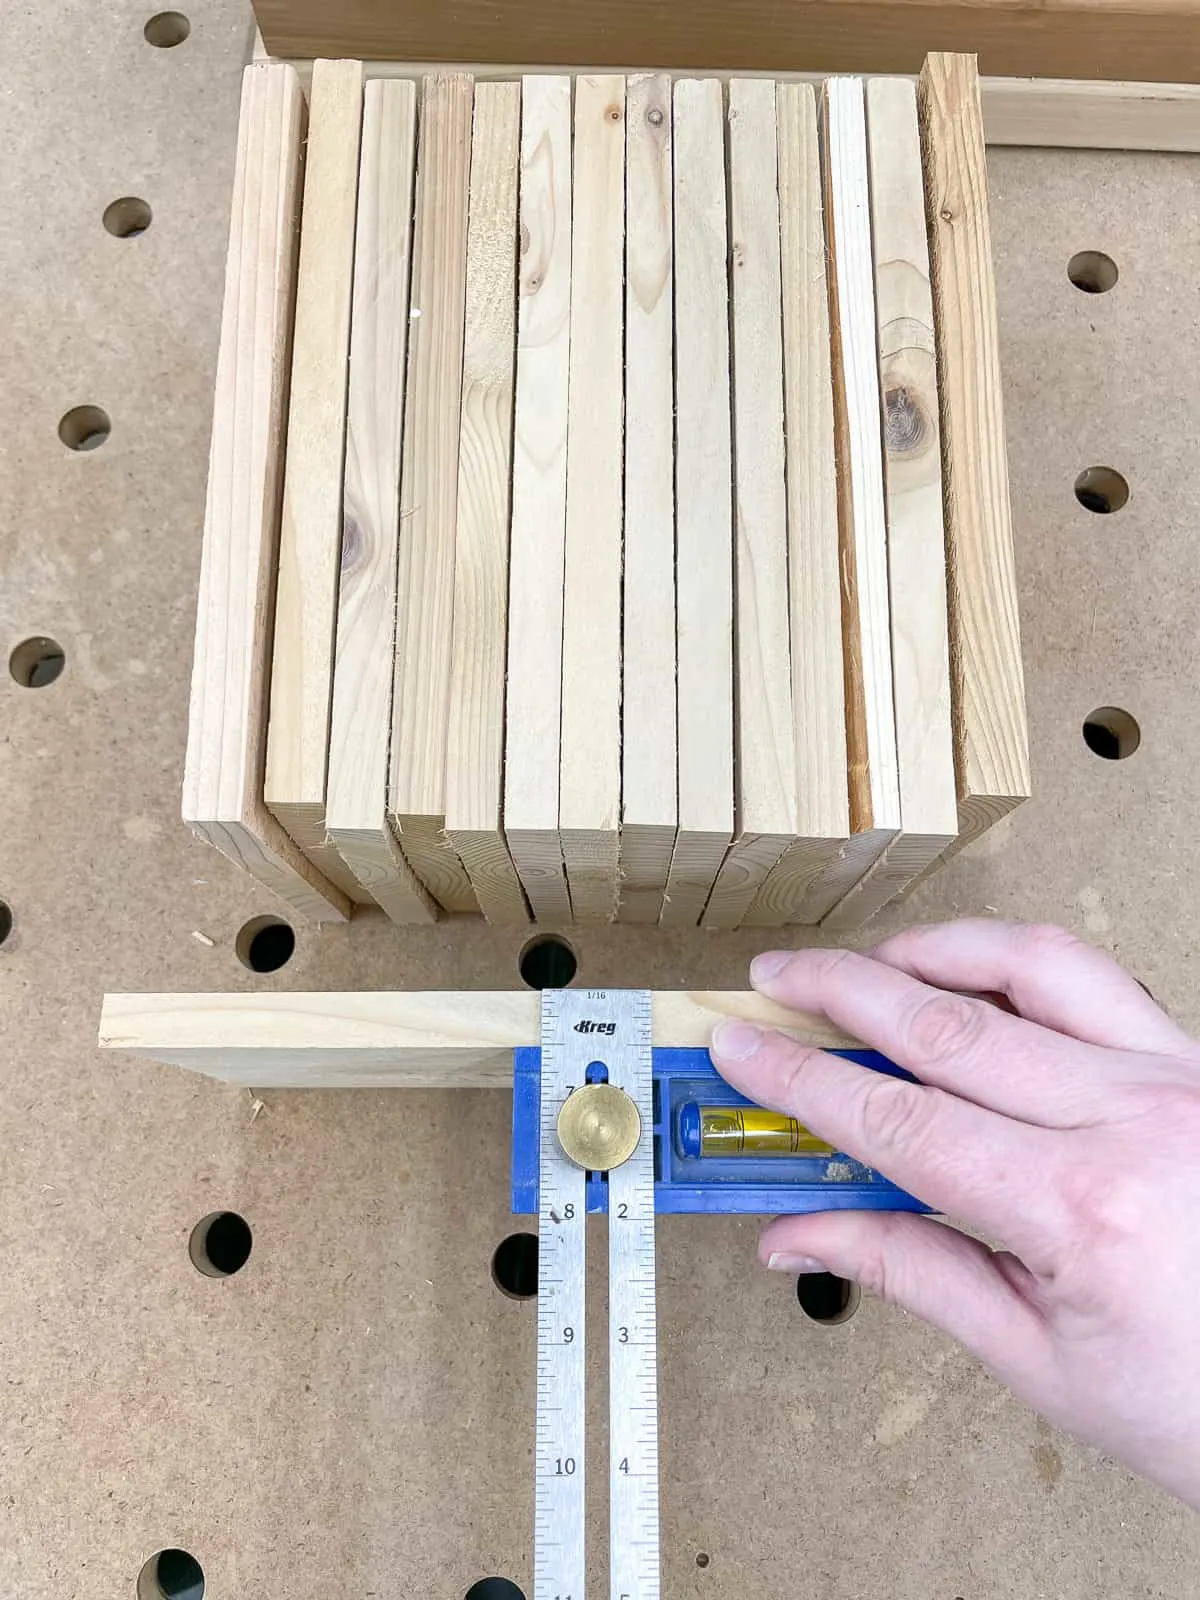 measuring the thickness of the shelf slats